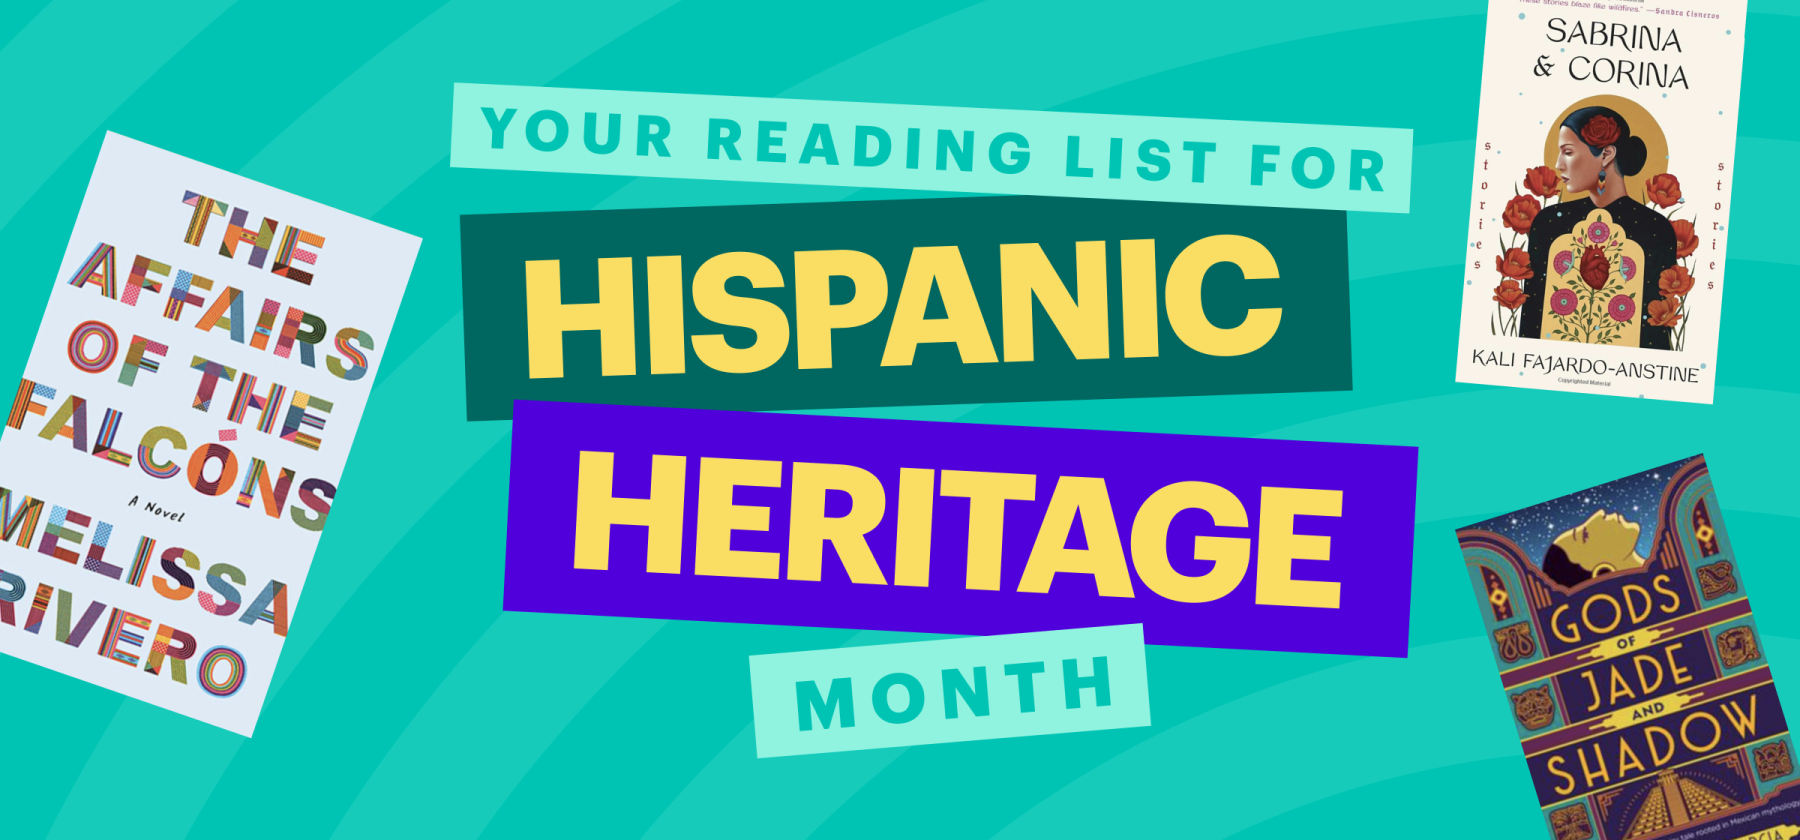 Your reading list for Hispanic Heritage Month